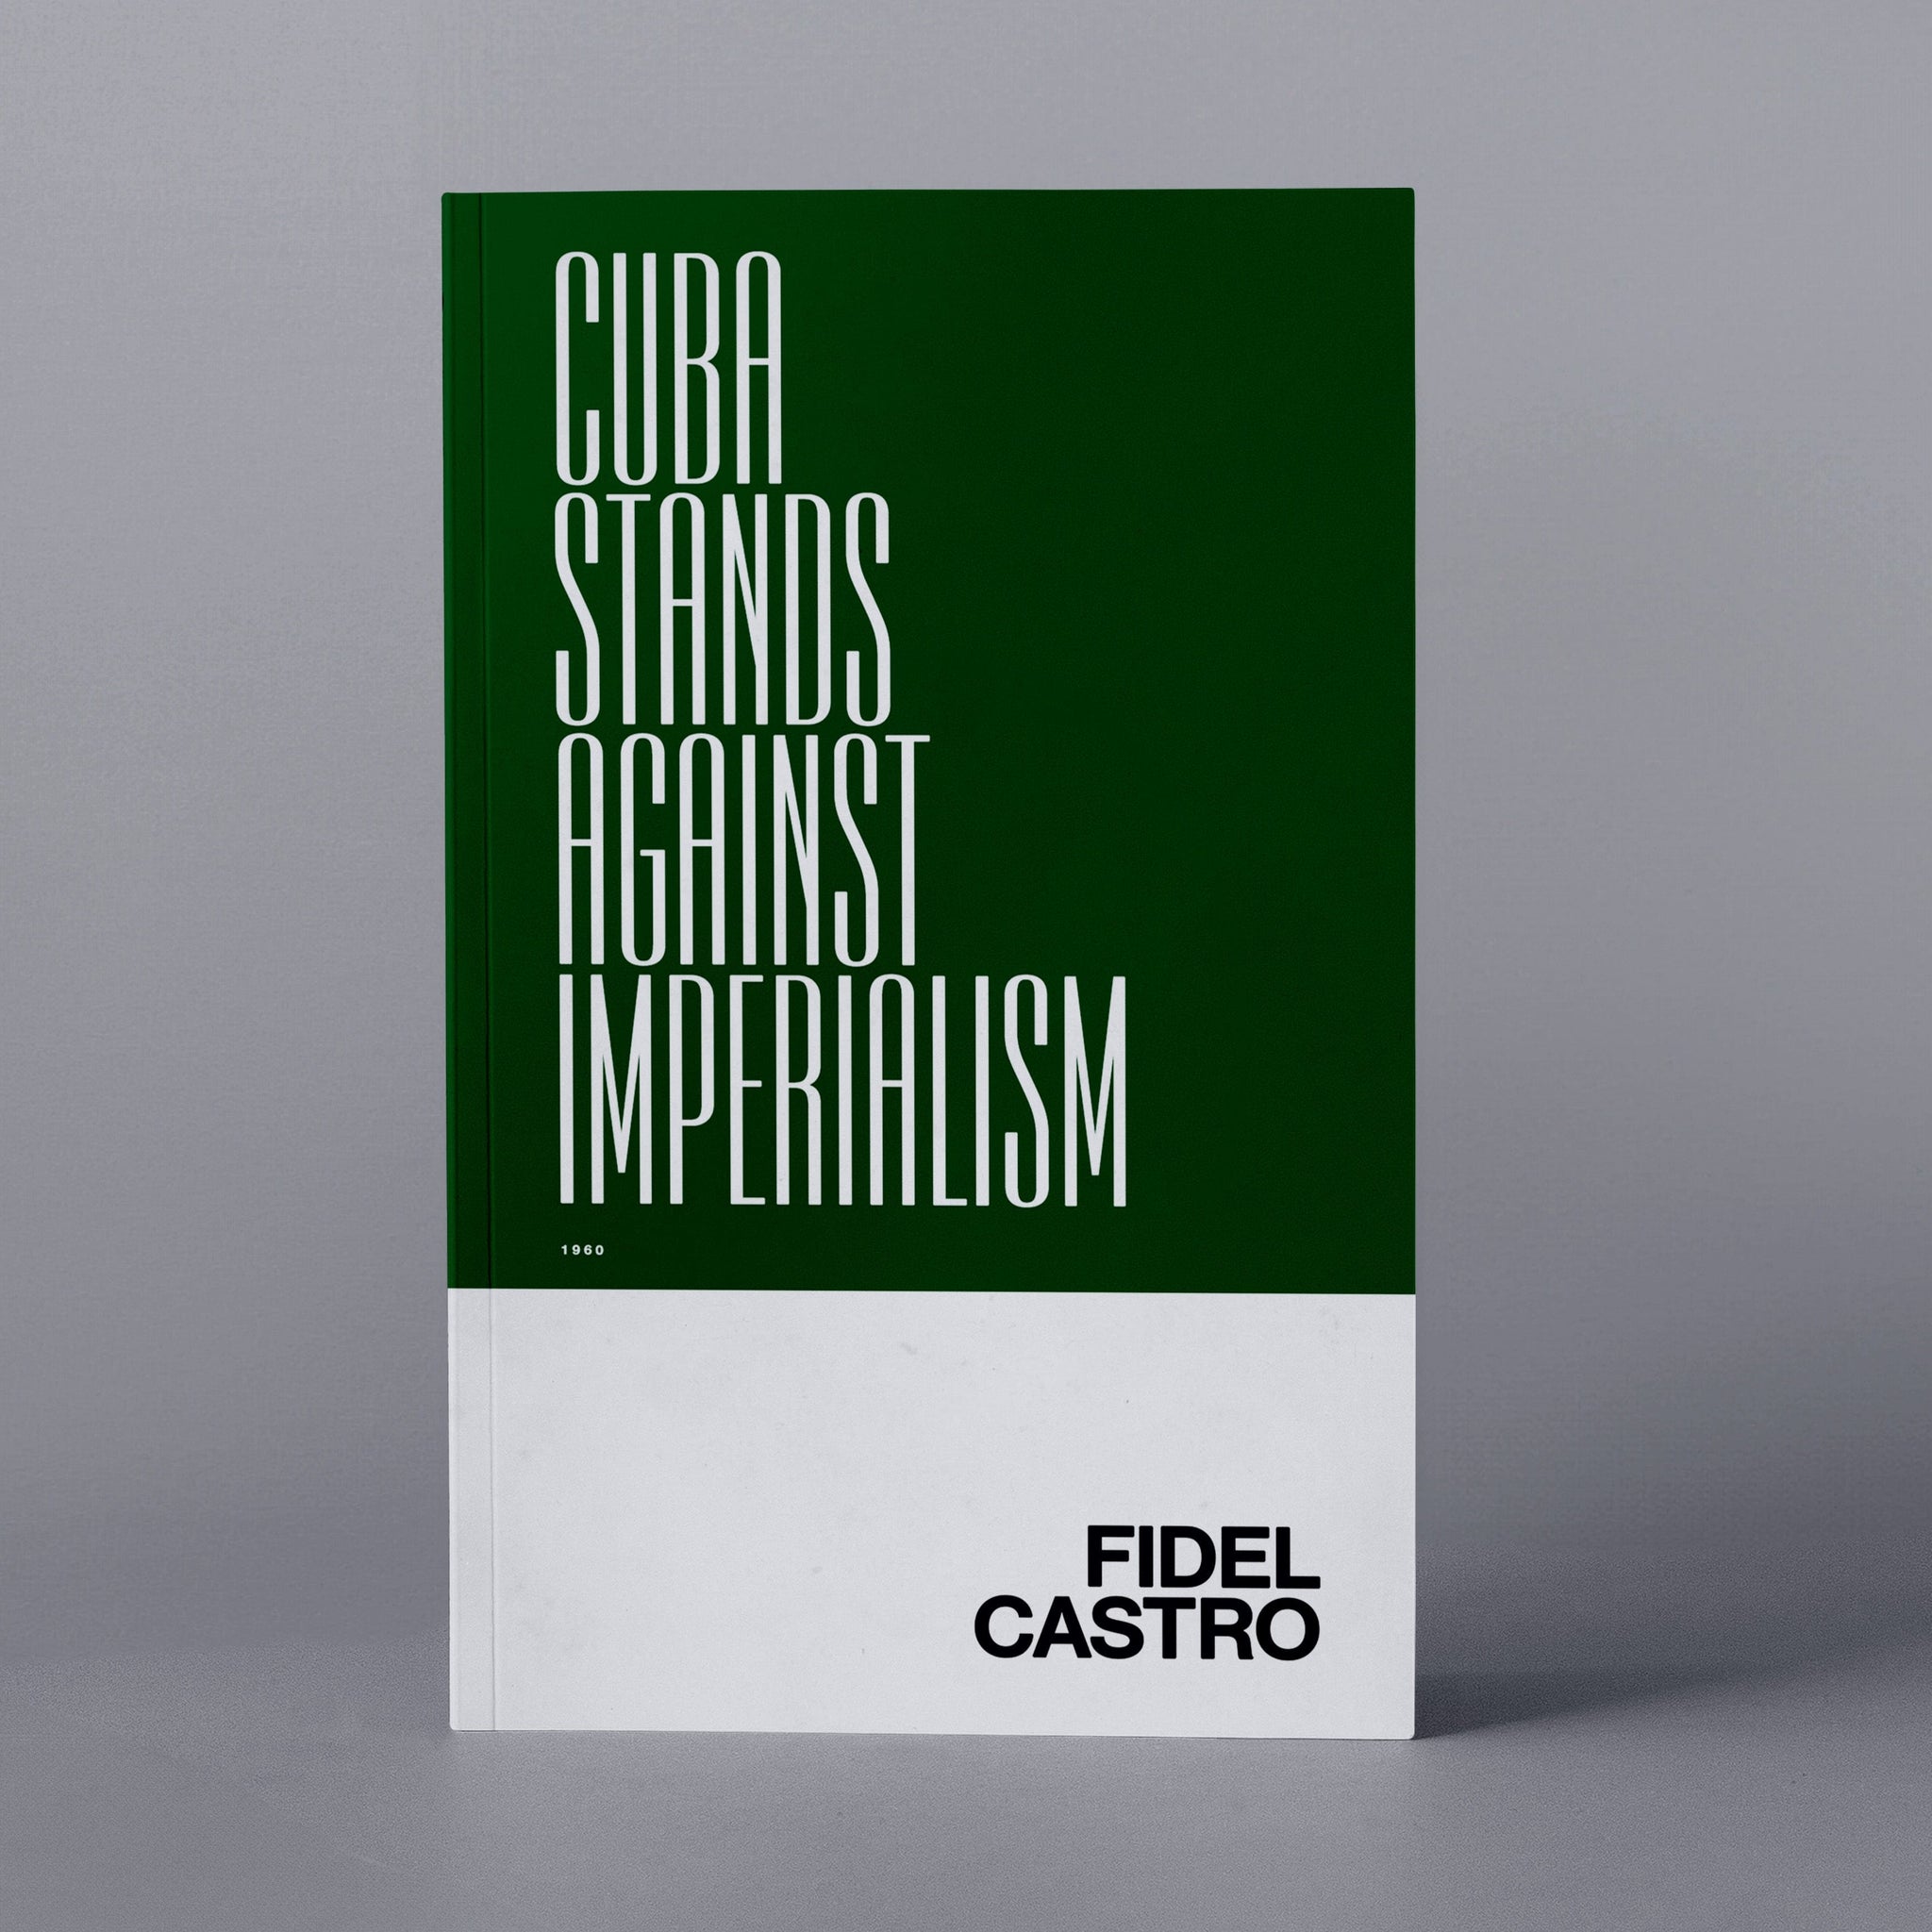 1960: Cuba Stands Against Imperialism! (Fidel Castro)